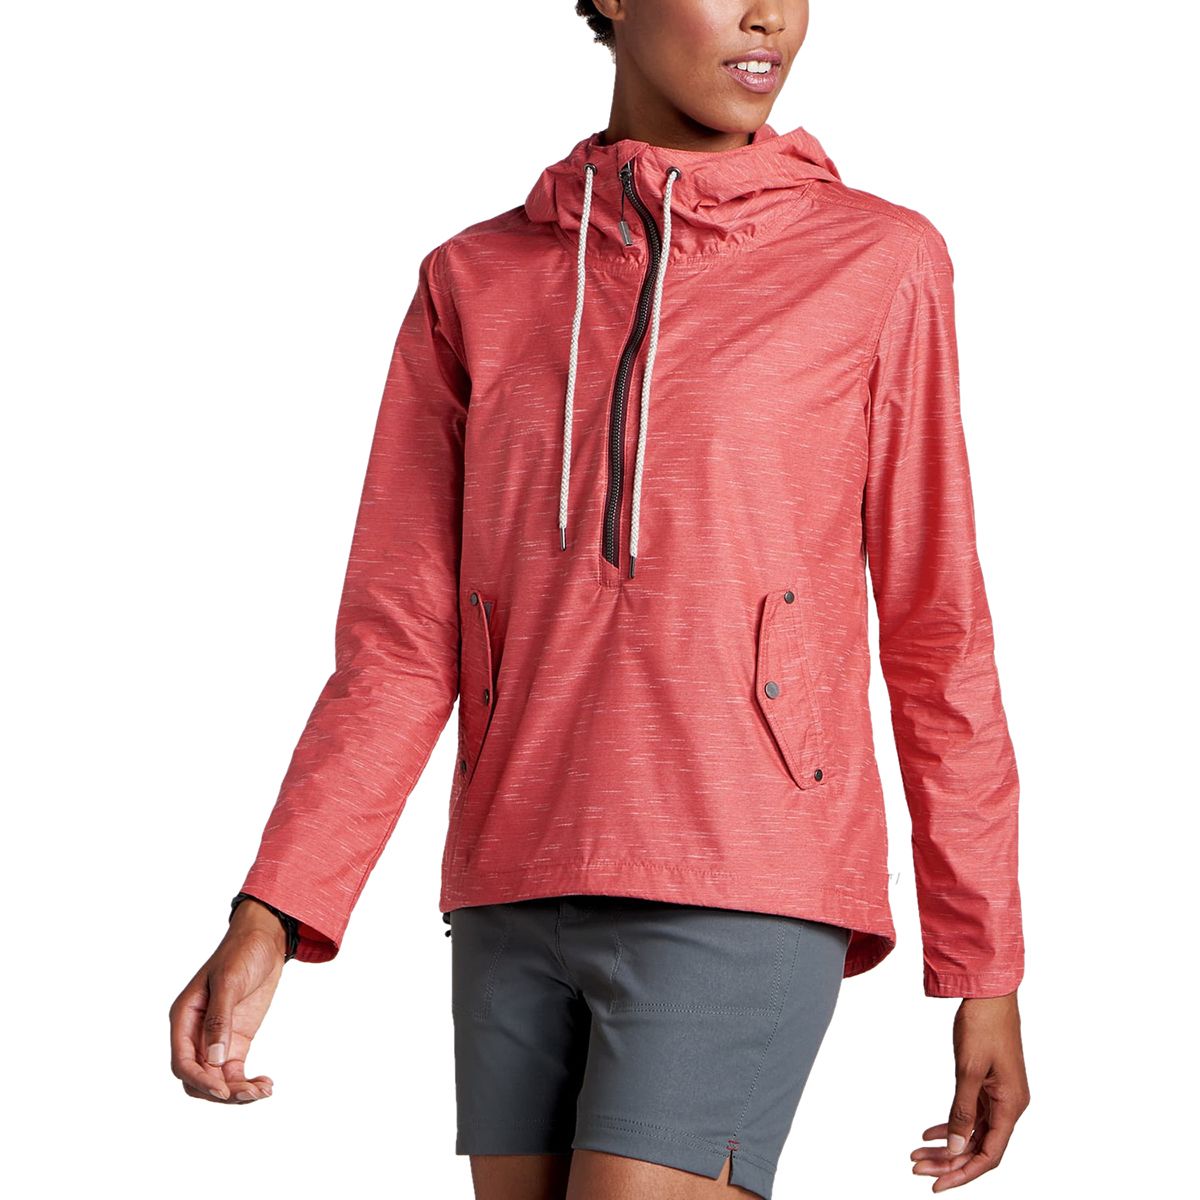 Toad&Co Totem Anorak Jacket - Women's